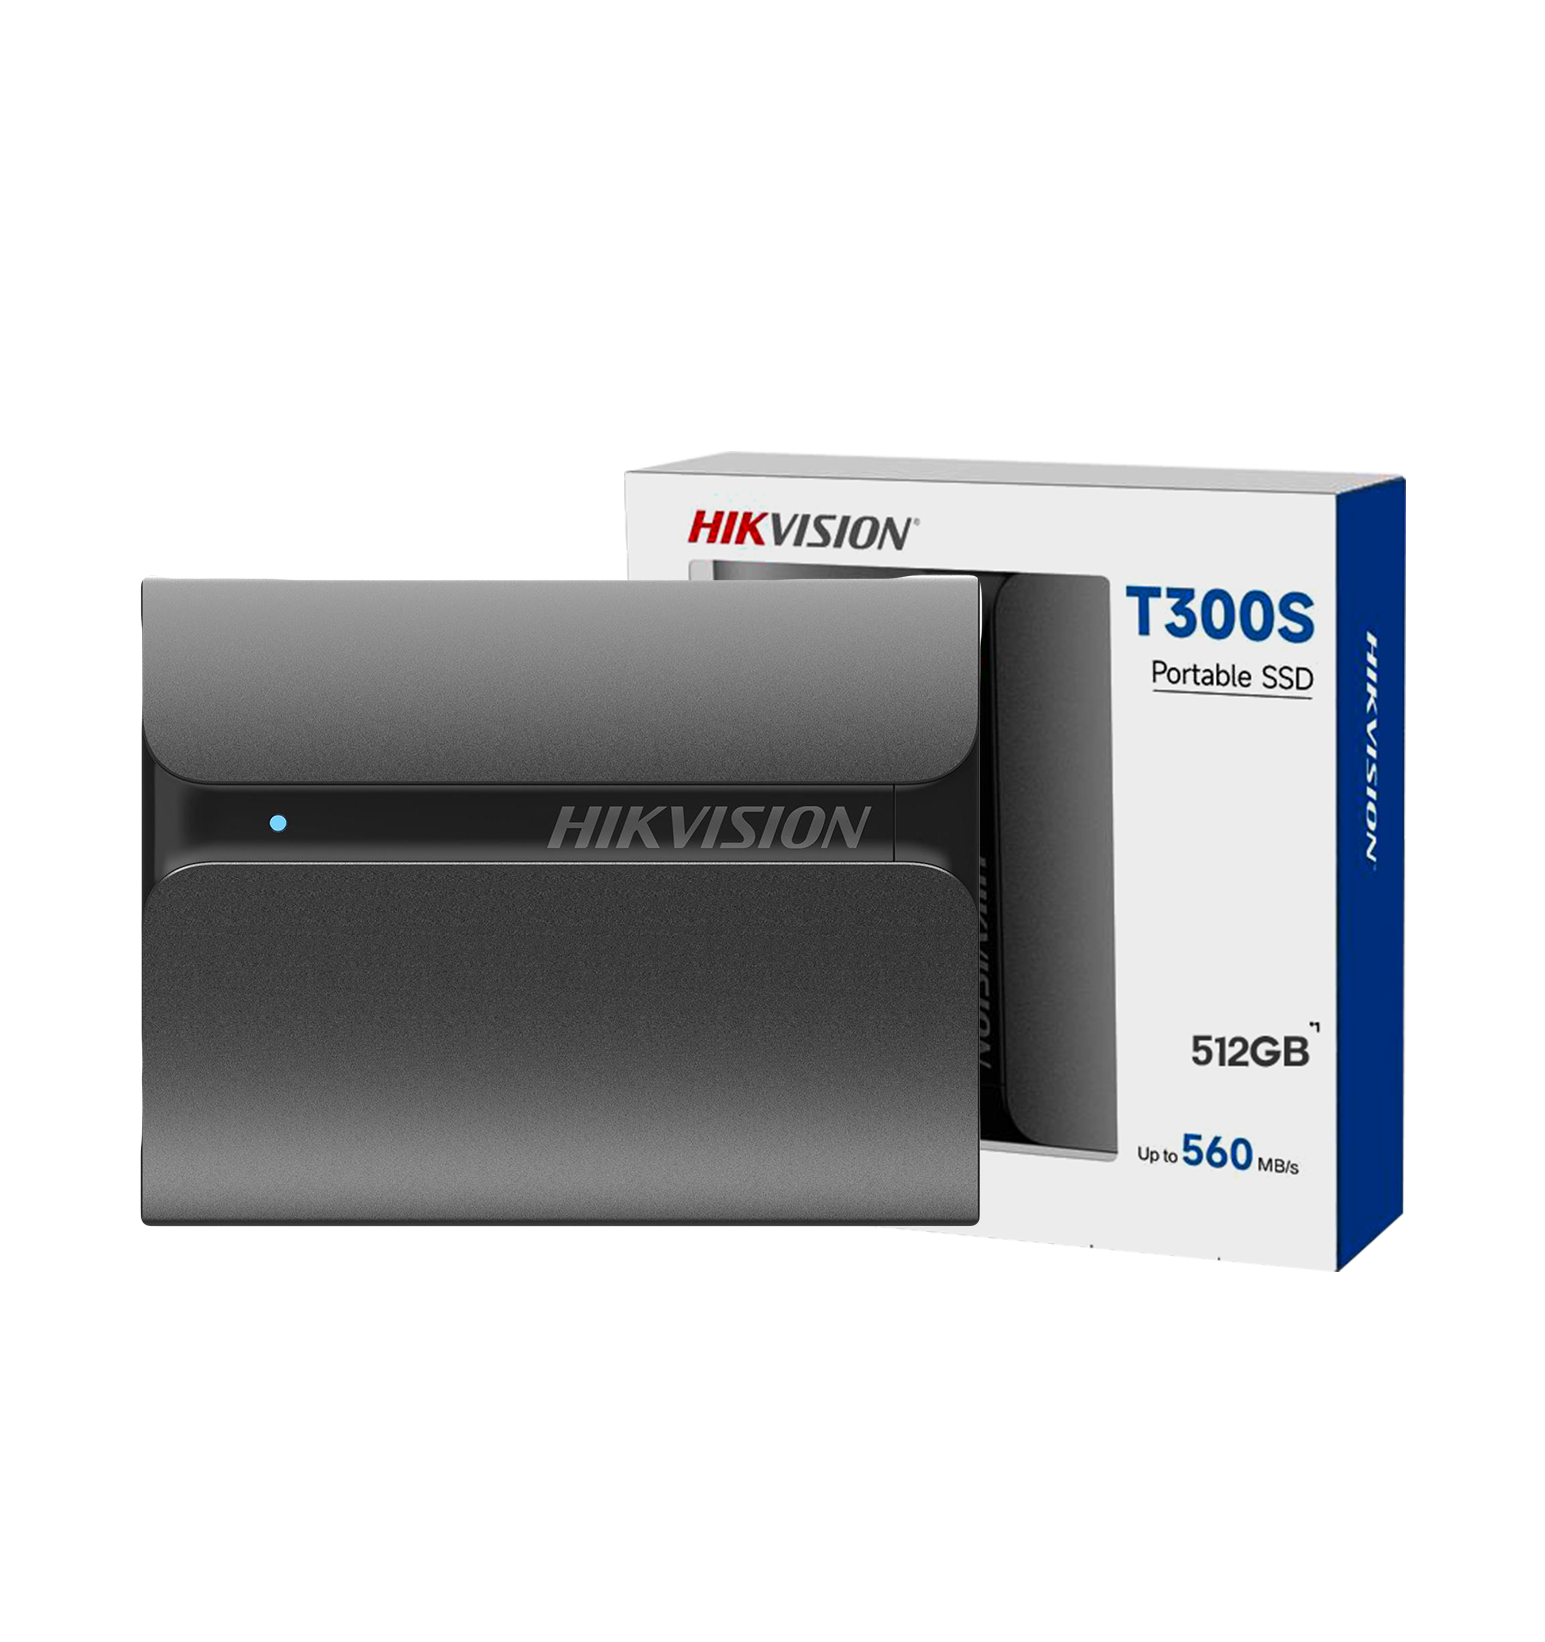 HIKVISION T300S-512GB-Portable SSD